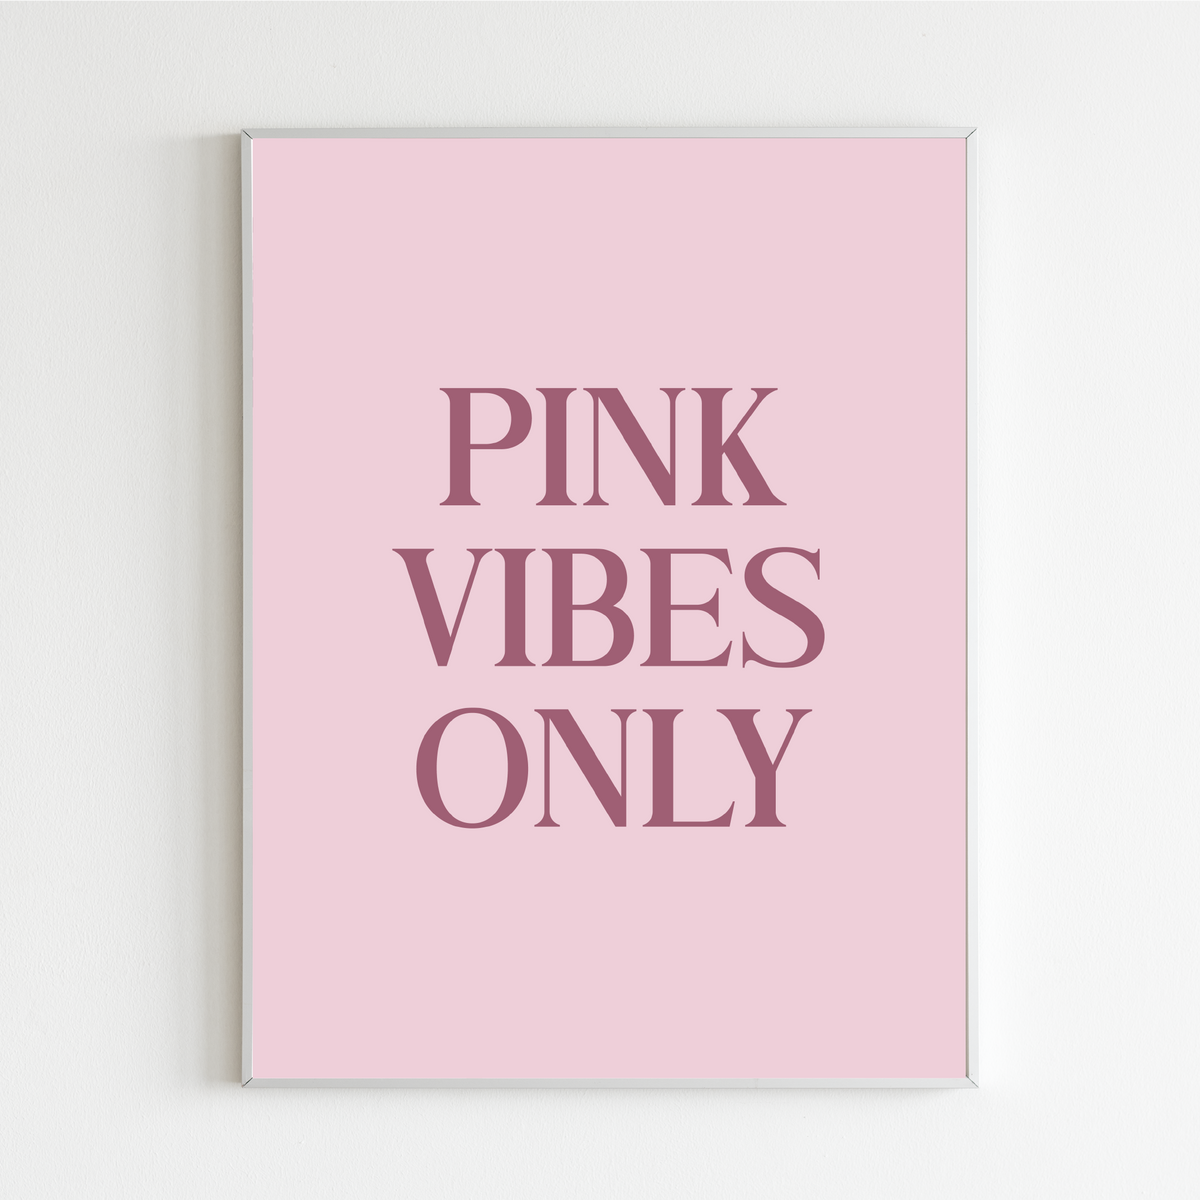 Pink Vibes Only 2.0 Print